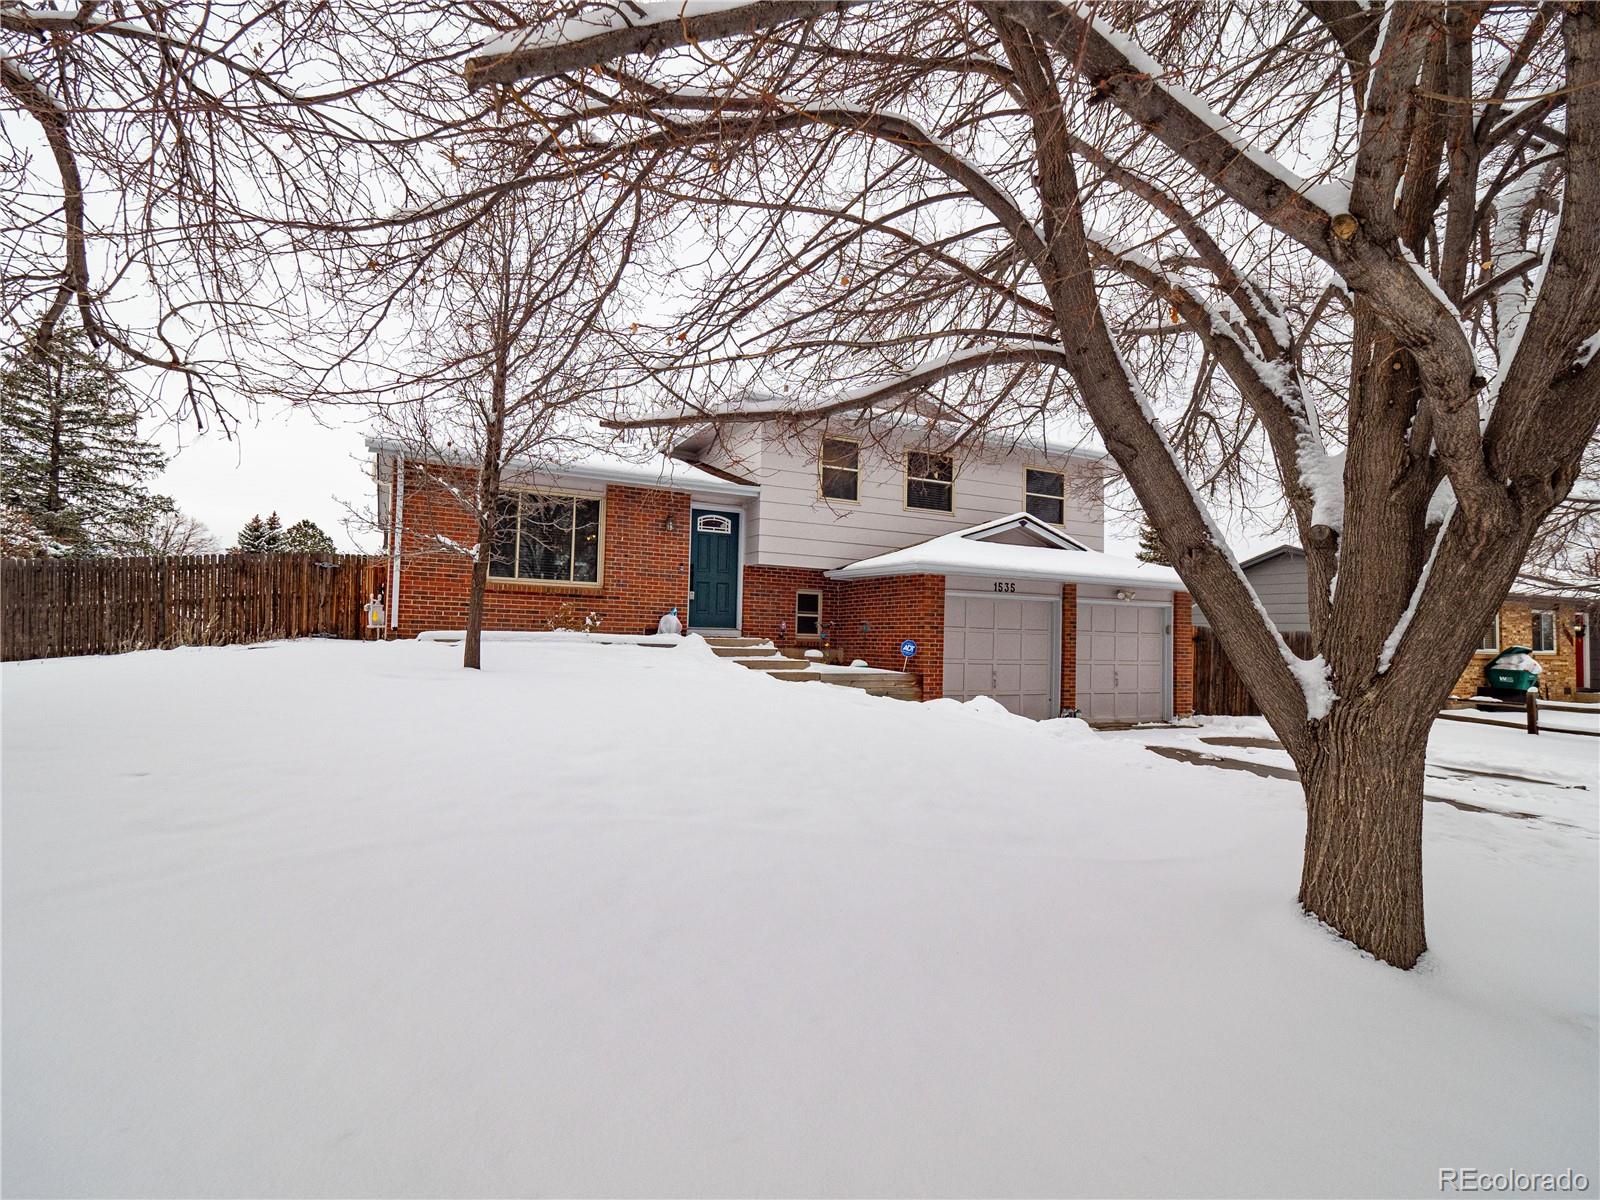 1535 s norfolk street, Aurora sold home. Closed on 2024-02-28 for $489,900.